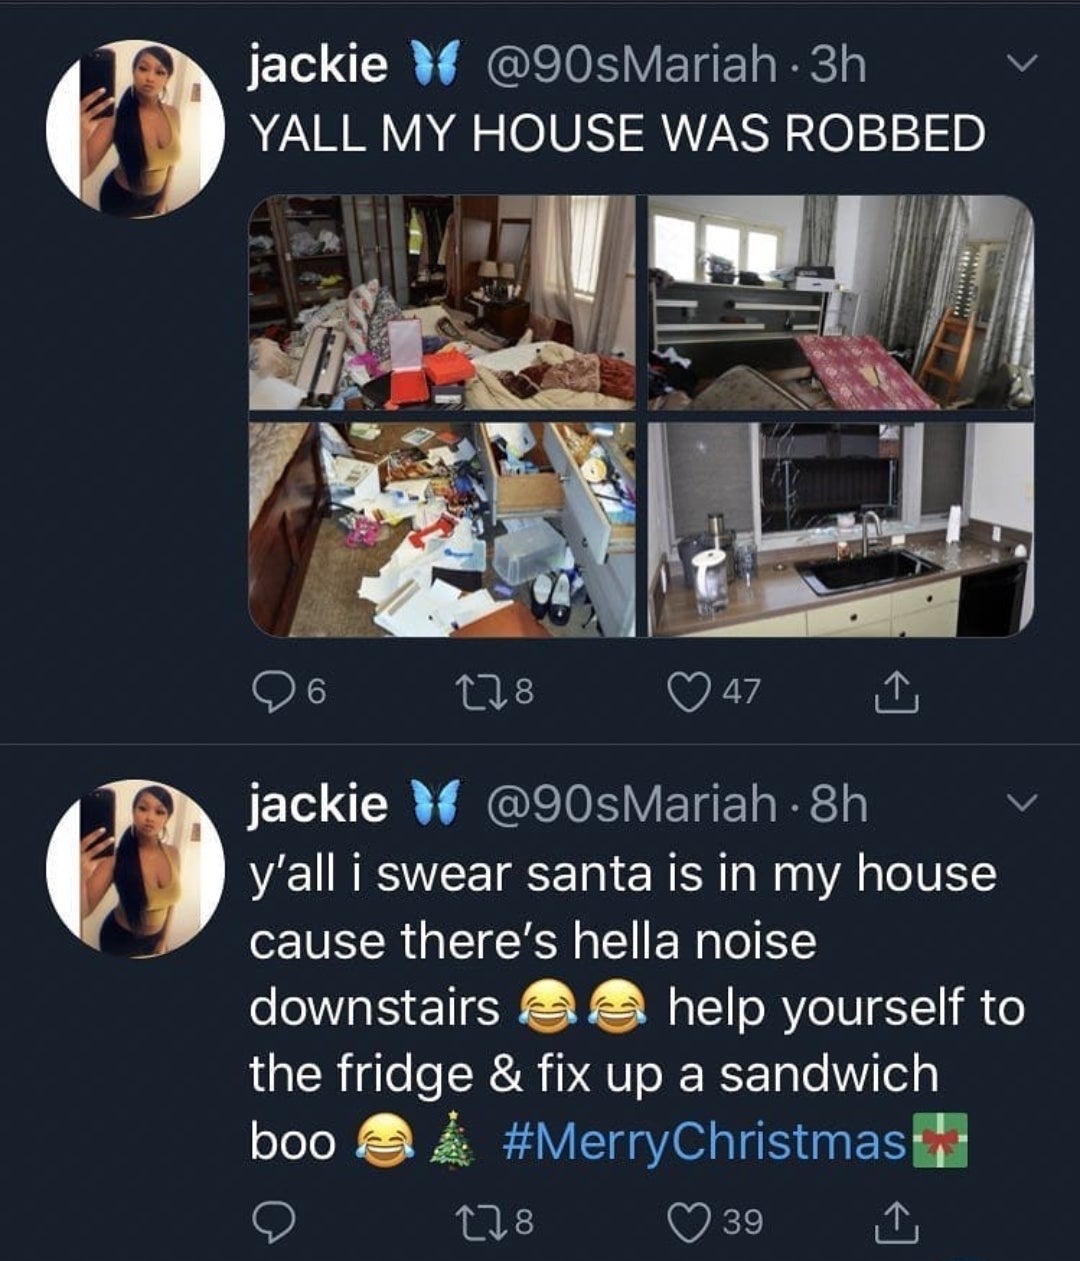 woman tweets about santa downstairs then robbed - jackie 3h Yall My House Was Robbed v Do 228 47 jackie ! 8h y'all i swear santa is in my house cause there's hella noise downstairs help yourself to the fridge & fix up a sandwich boo 2 4 o 228 39 I